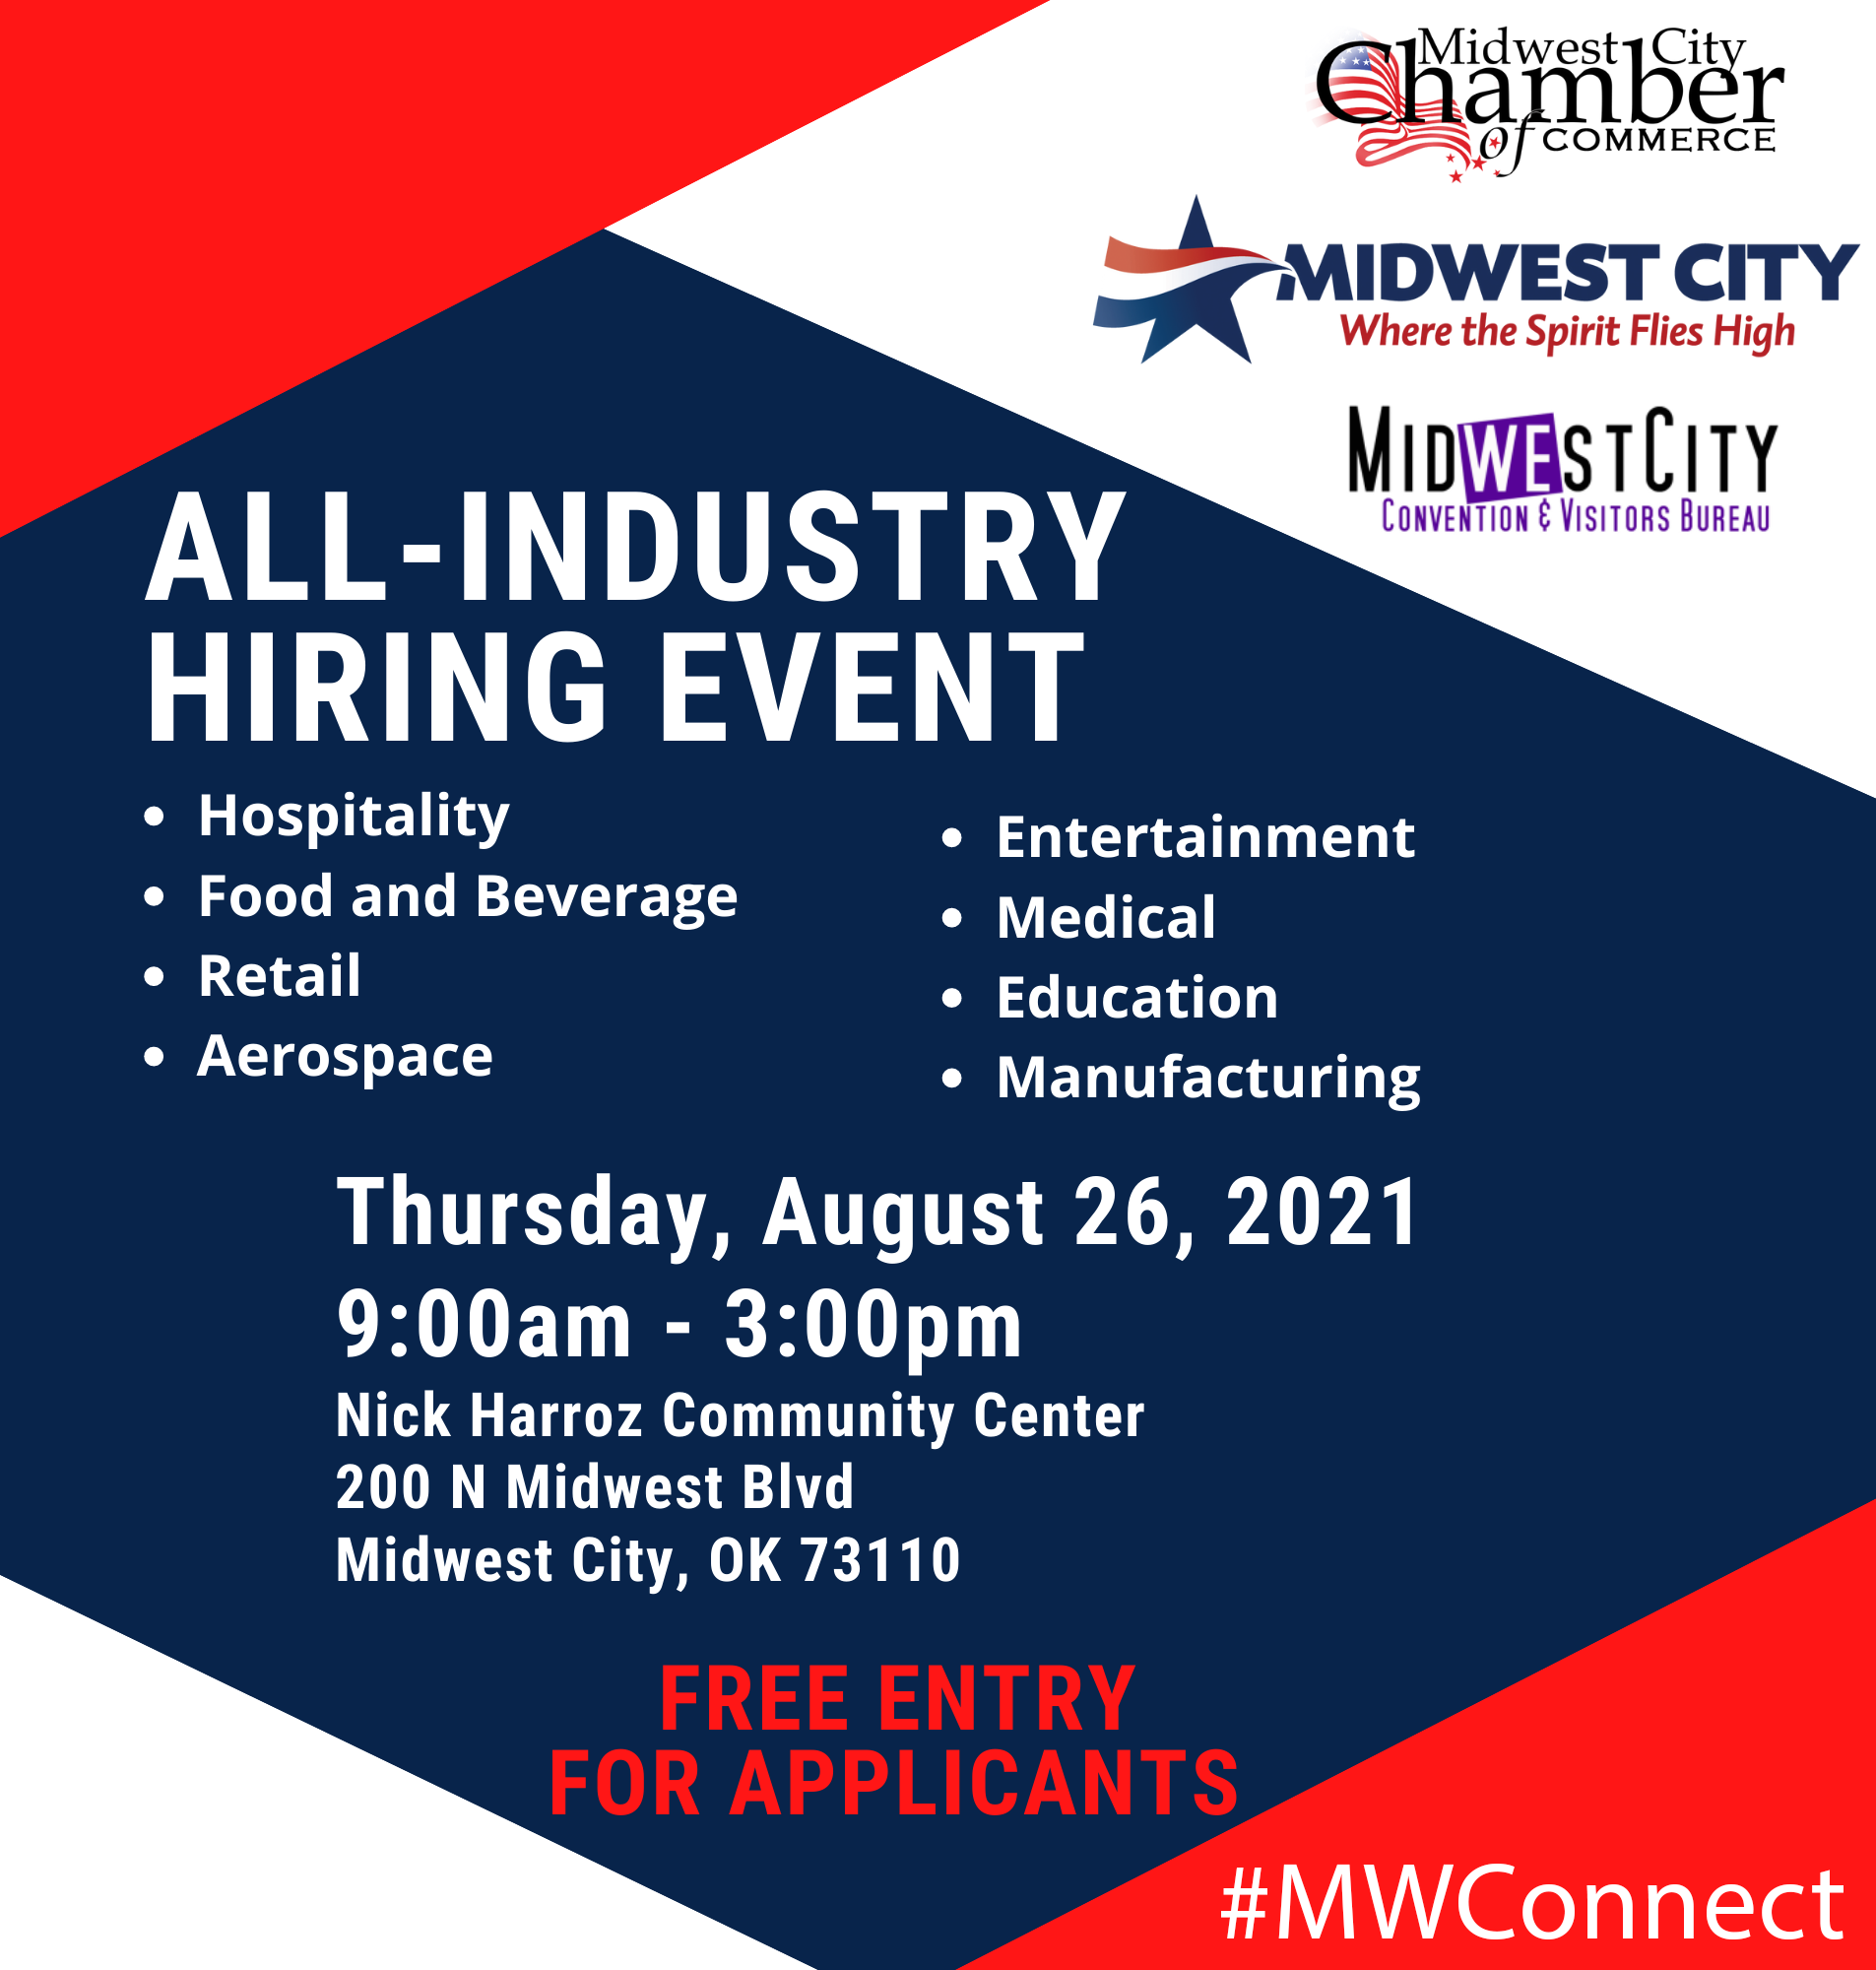 AllIndustry Hiring Event Midwest City Oklahoma